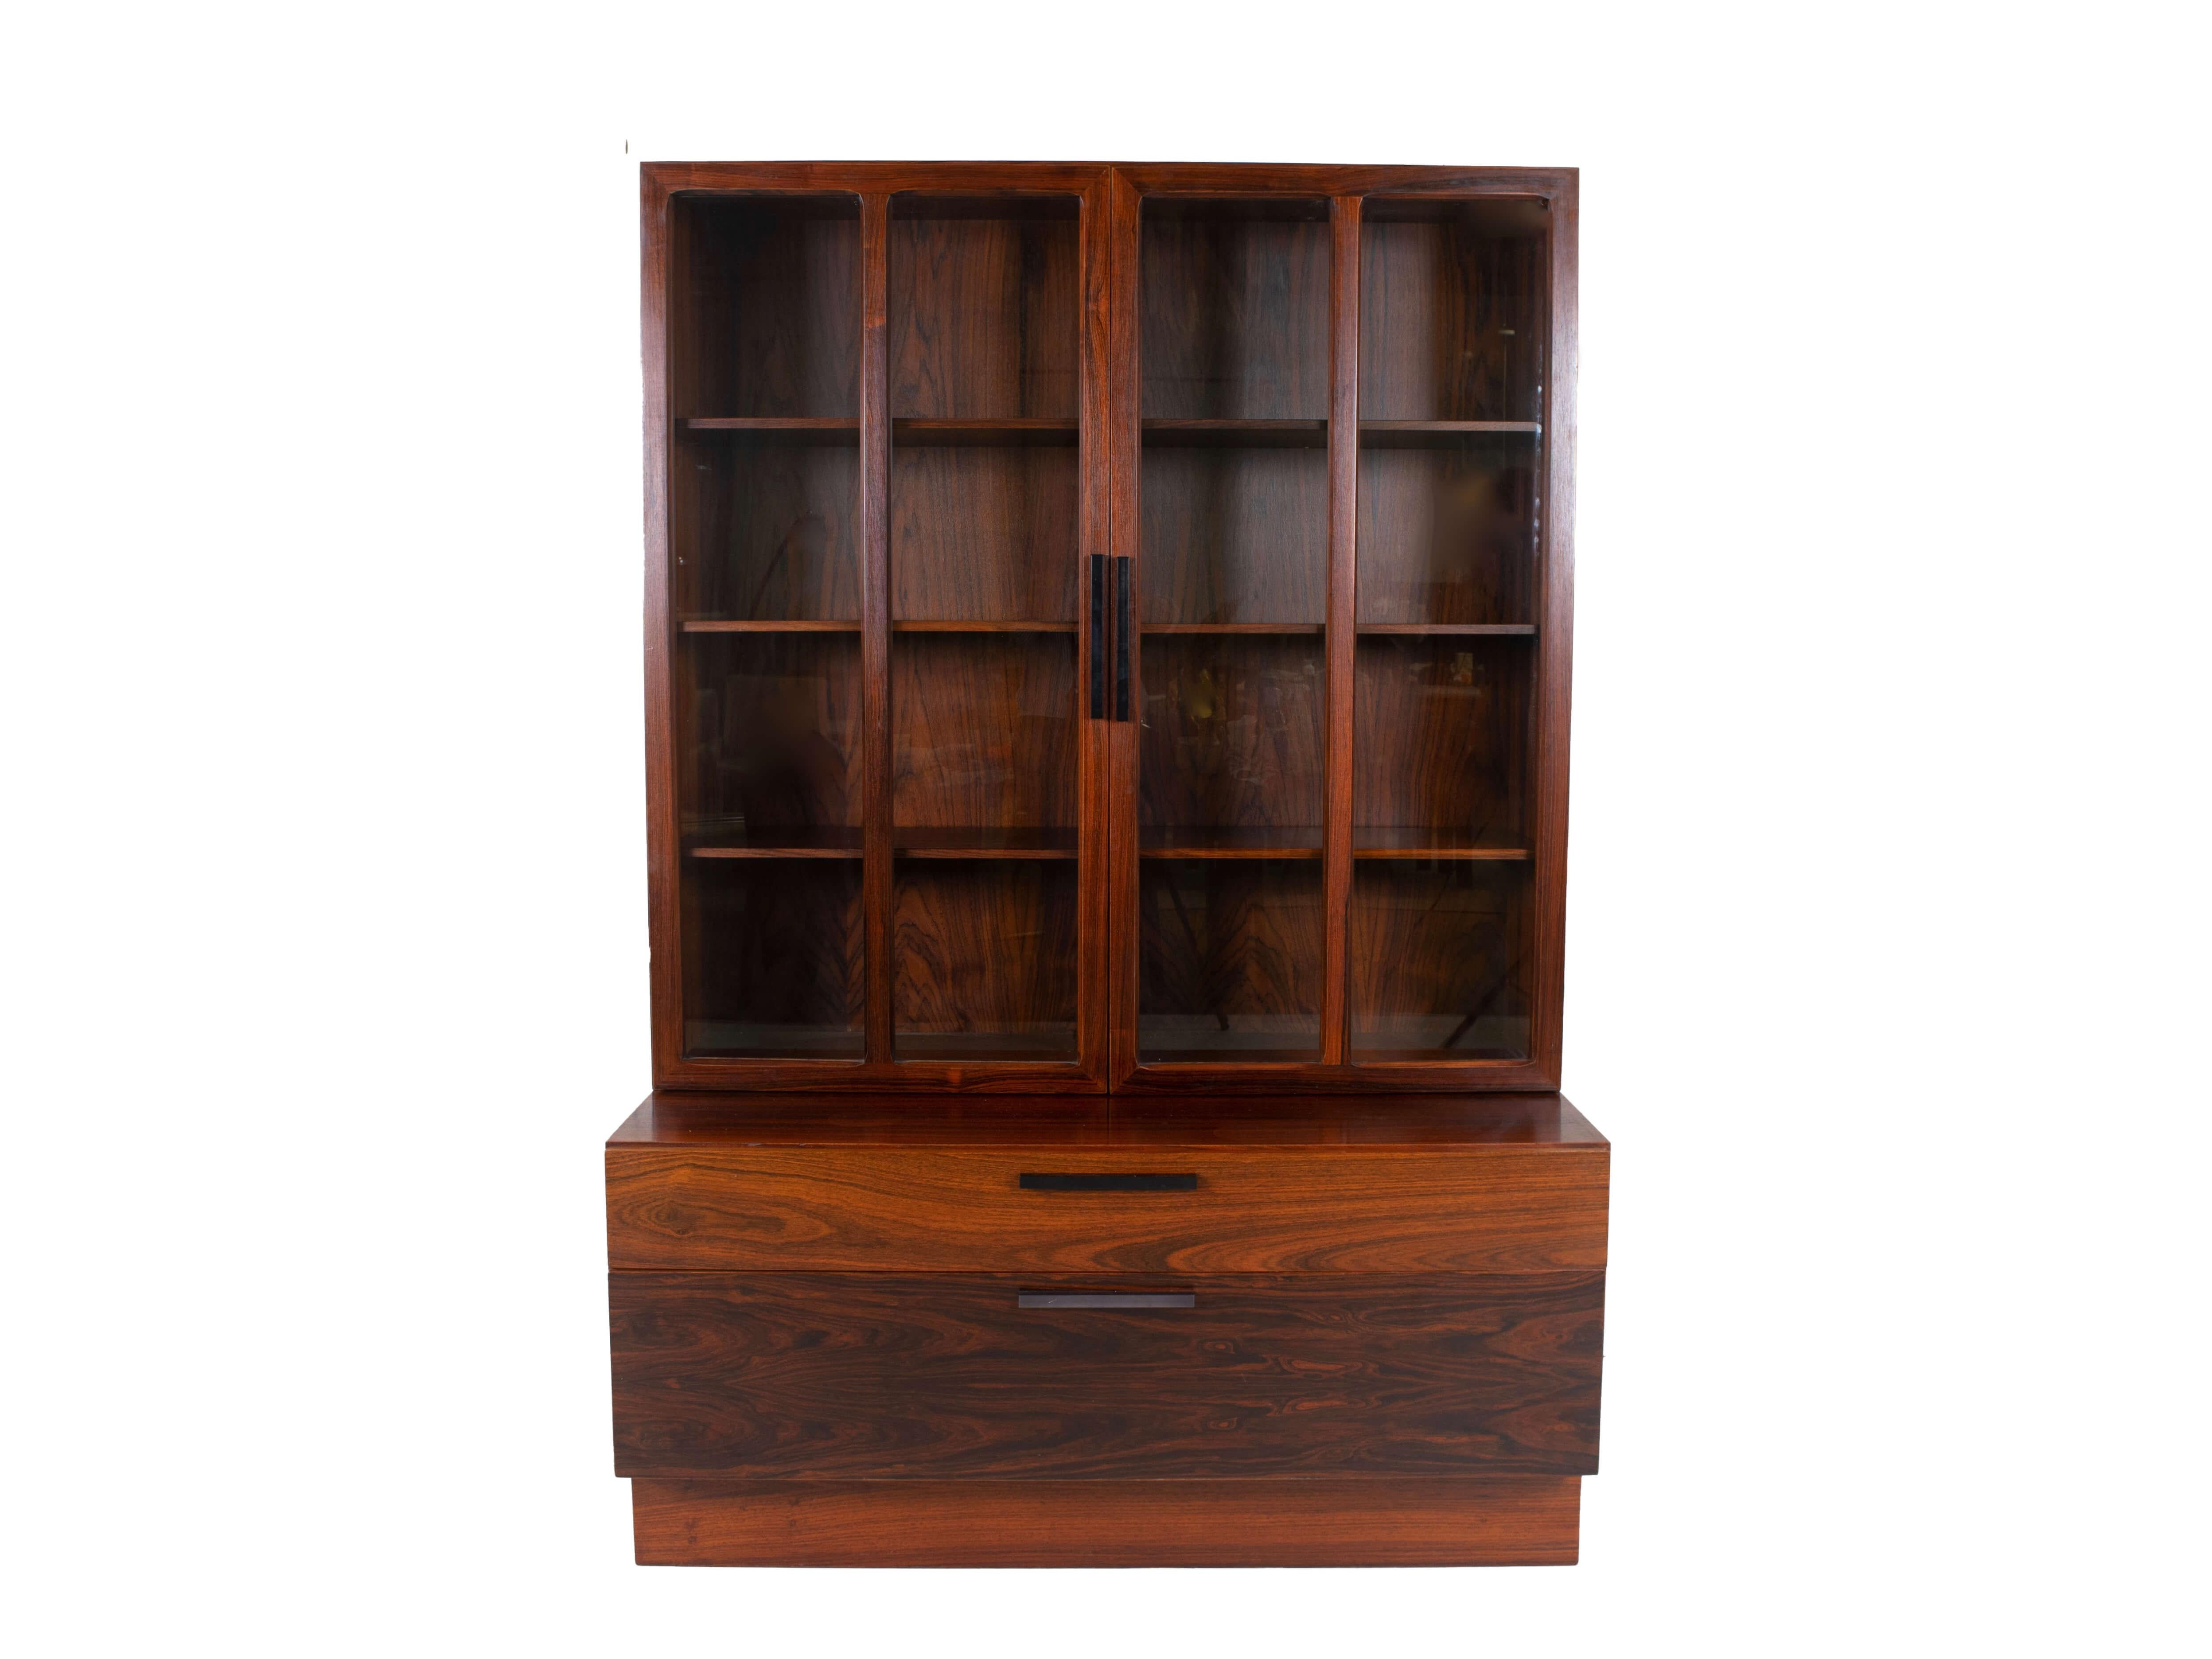 Wall unit by Ib Kofod-Larsen for Faarup Møbelfabrik in Rosewood from Denmark 1960s. This unit consists of two elements that are not connected; a display cabinet and a cabinet with two drawers. The display cabinet has two doors with glass and black